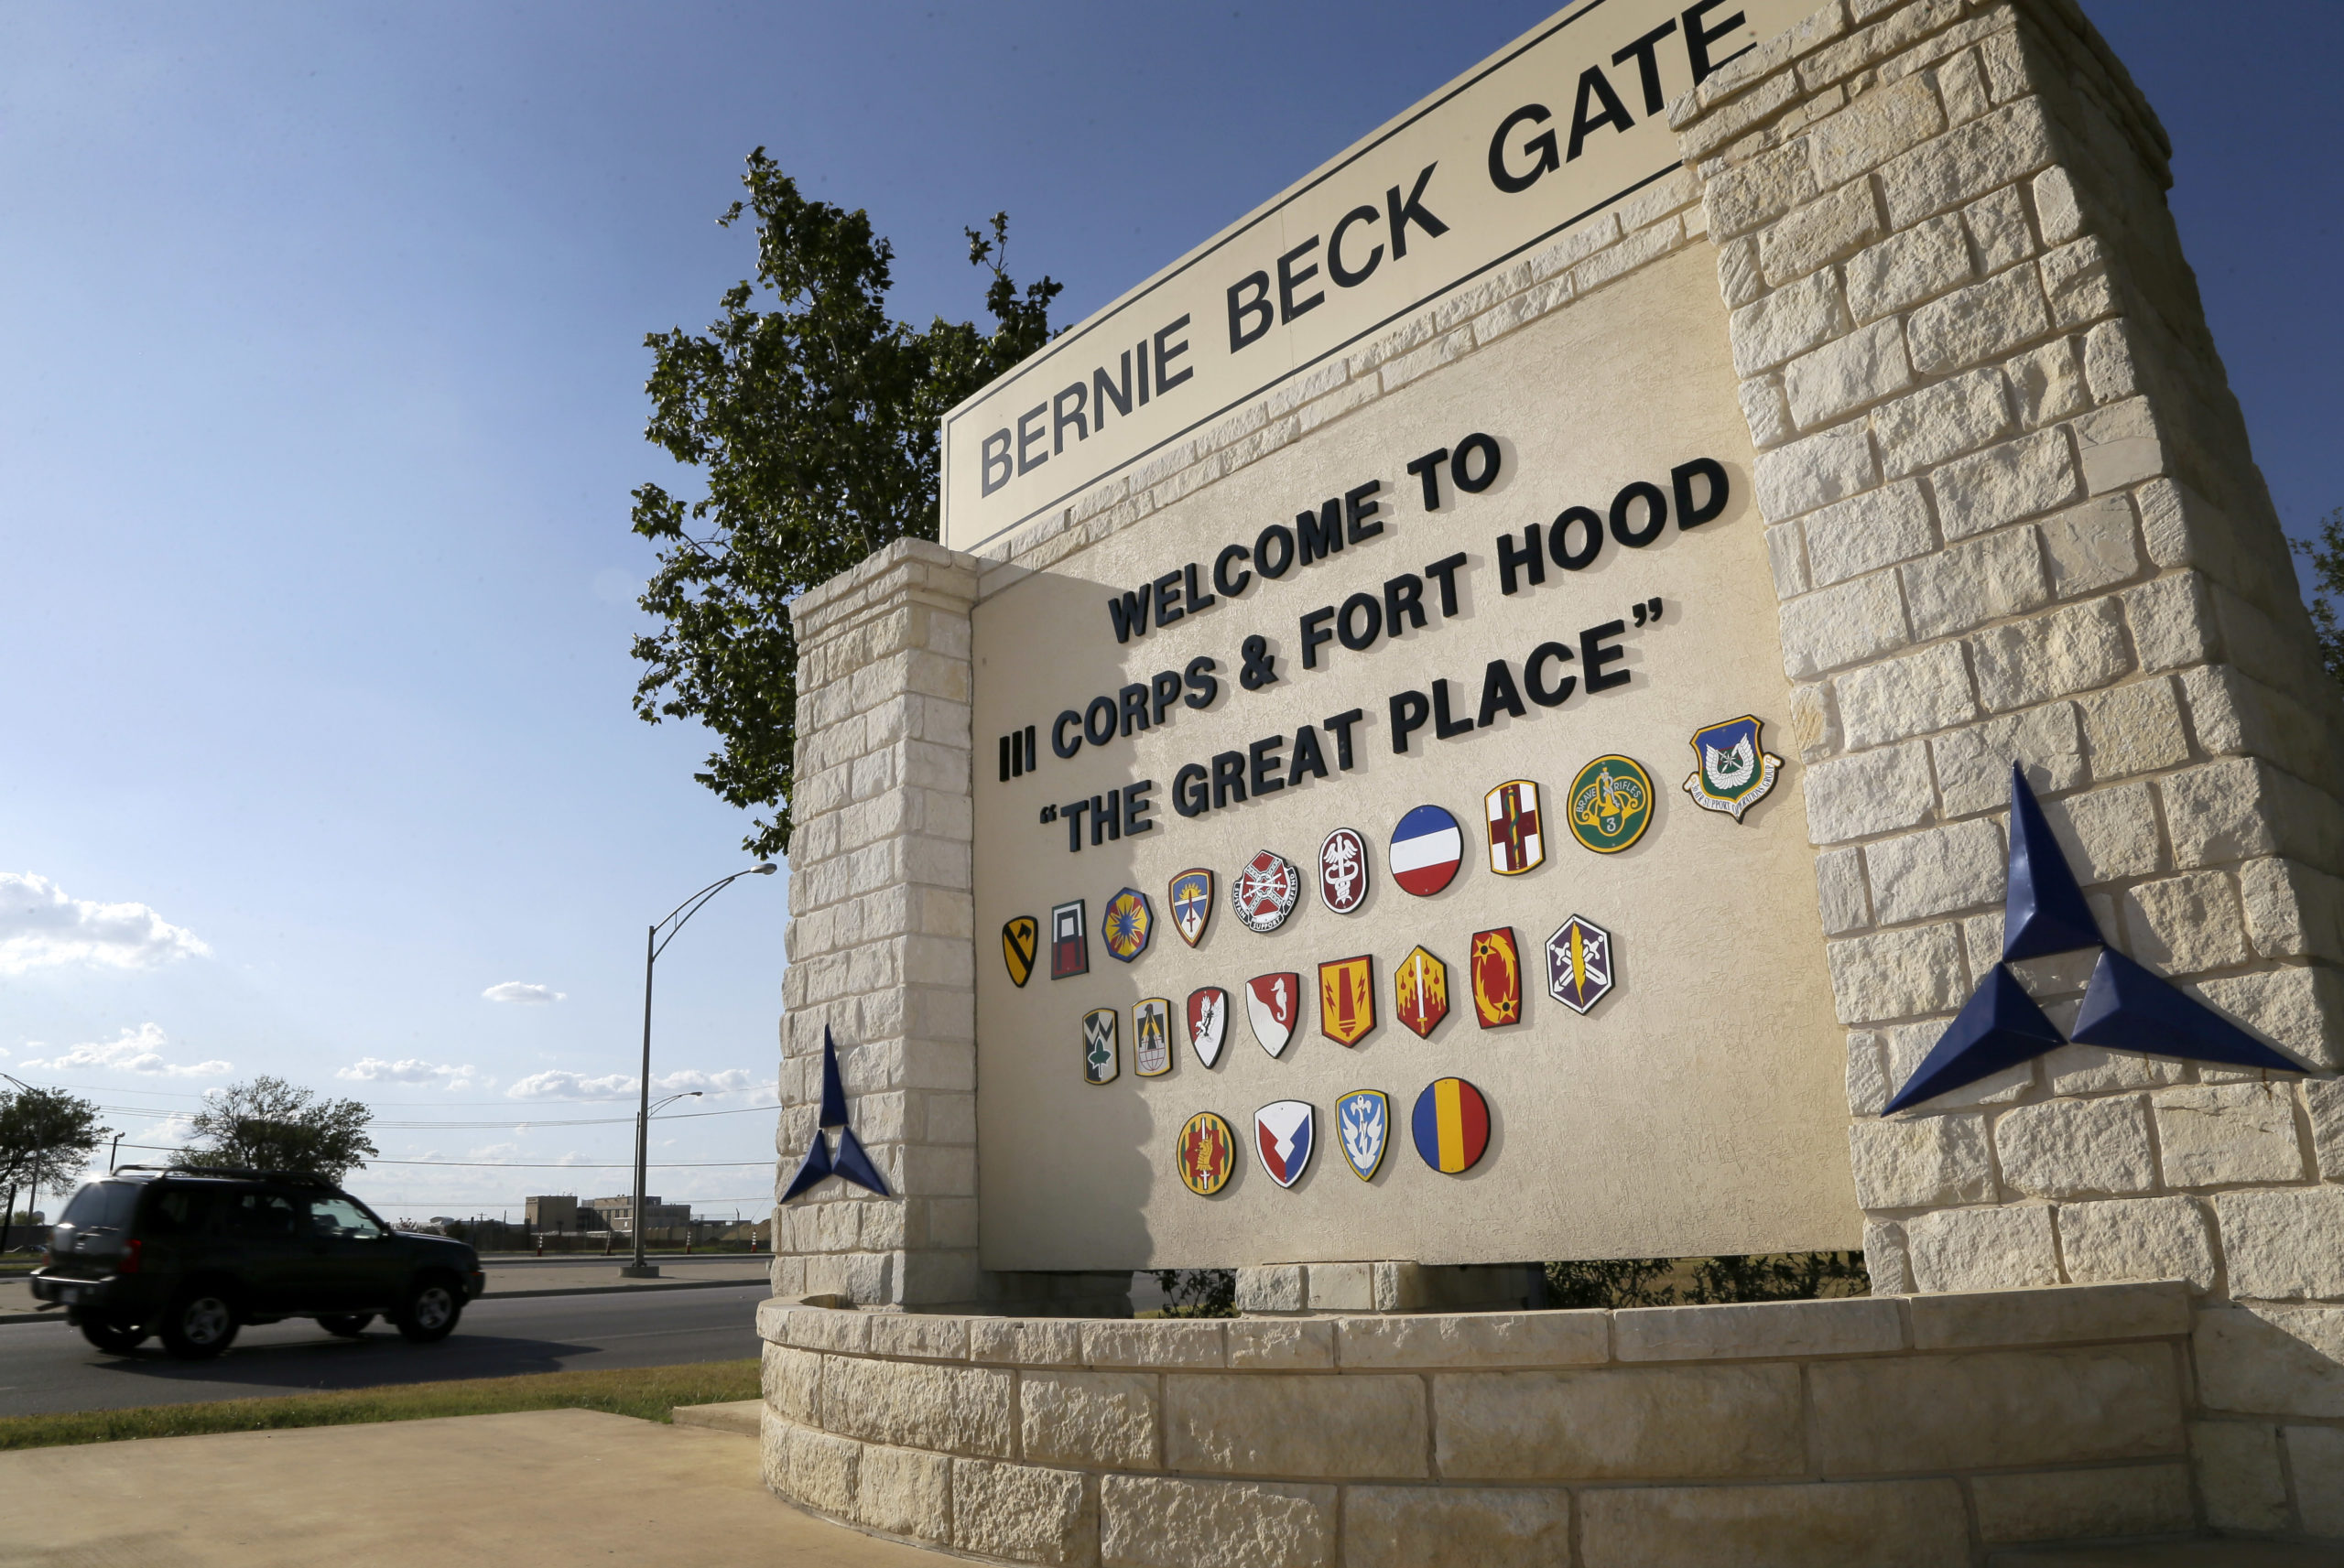 Traffic flows through the main gate past a welcome sign, Tuesday, July 9, 2013, in Fort Hood, Texas. U.S. Army Maj. Nidal Hasan faces execution or life without parole if convicted in the 2009 rampage that killed 13 and wounded nearly three dozen on the Texas Army post. (AP Photo/Tony Gutierrez)